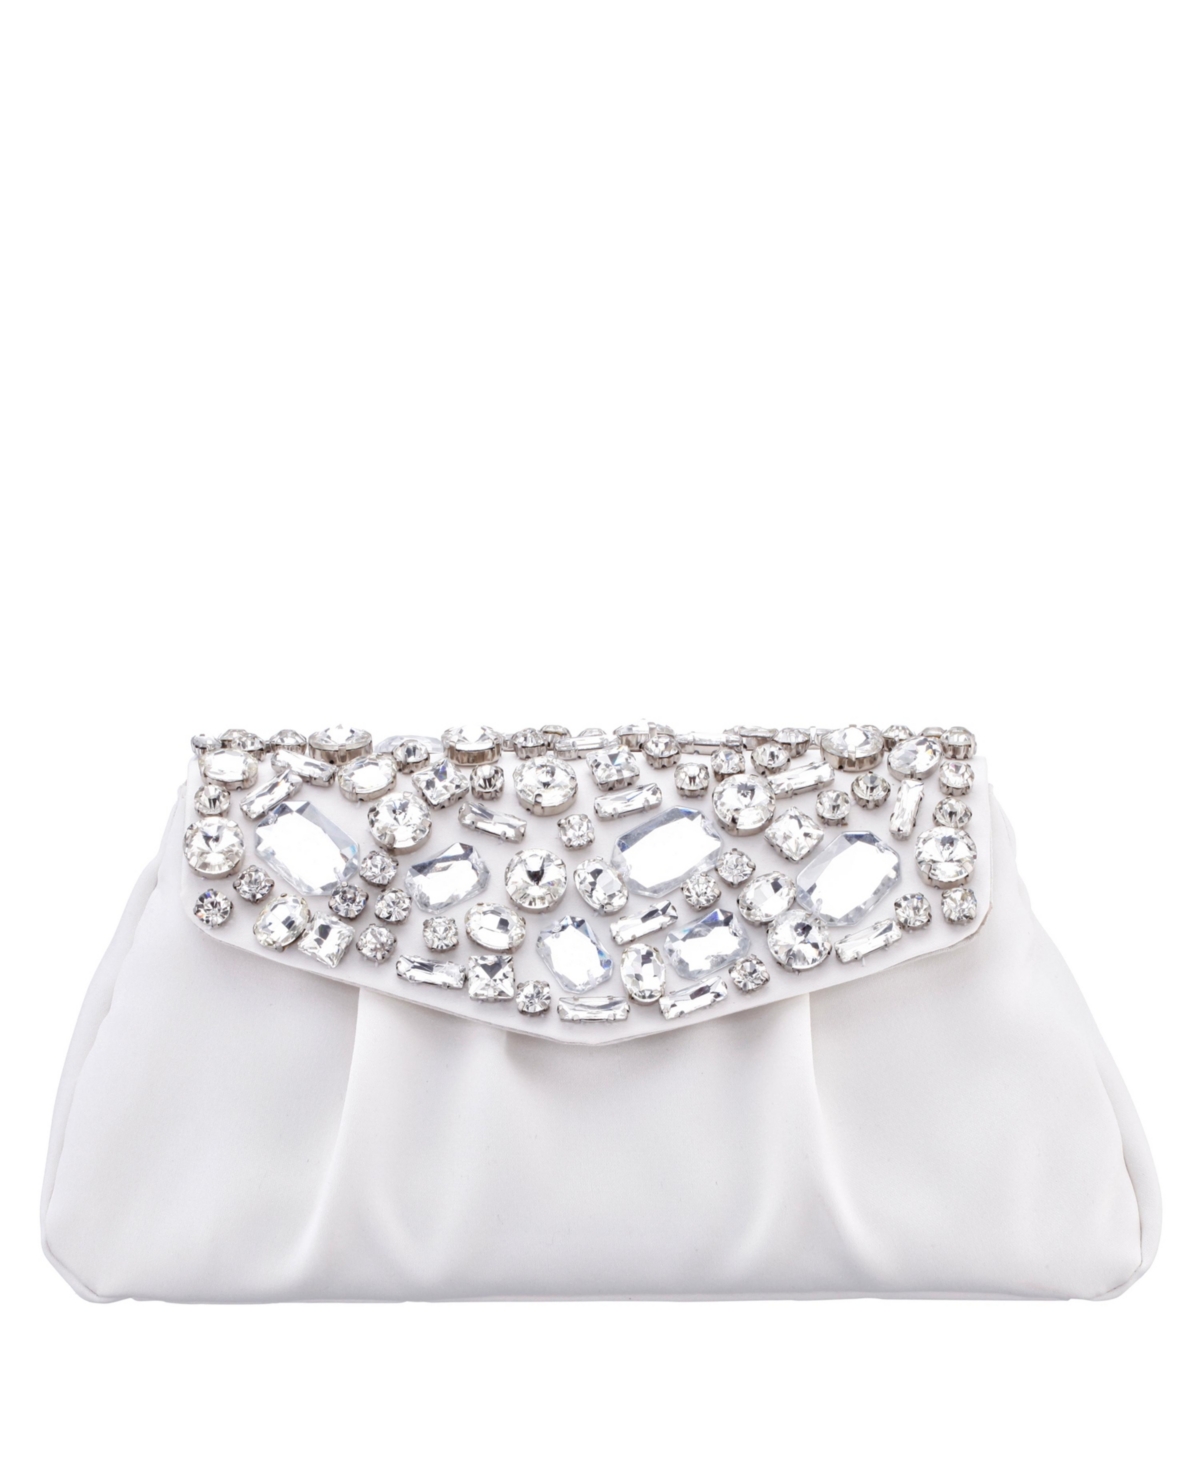 Nina Women's Satin Flap Bag With Crystals In Ivory